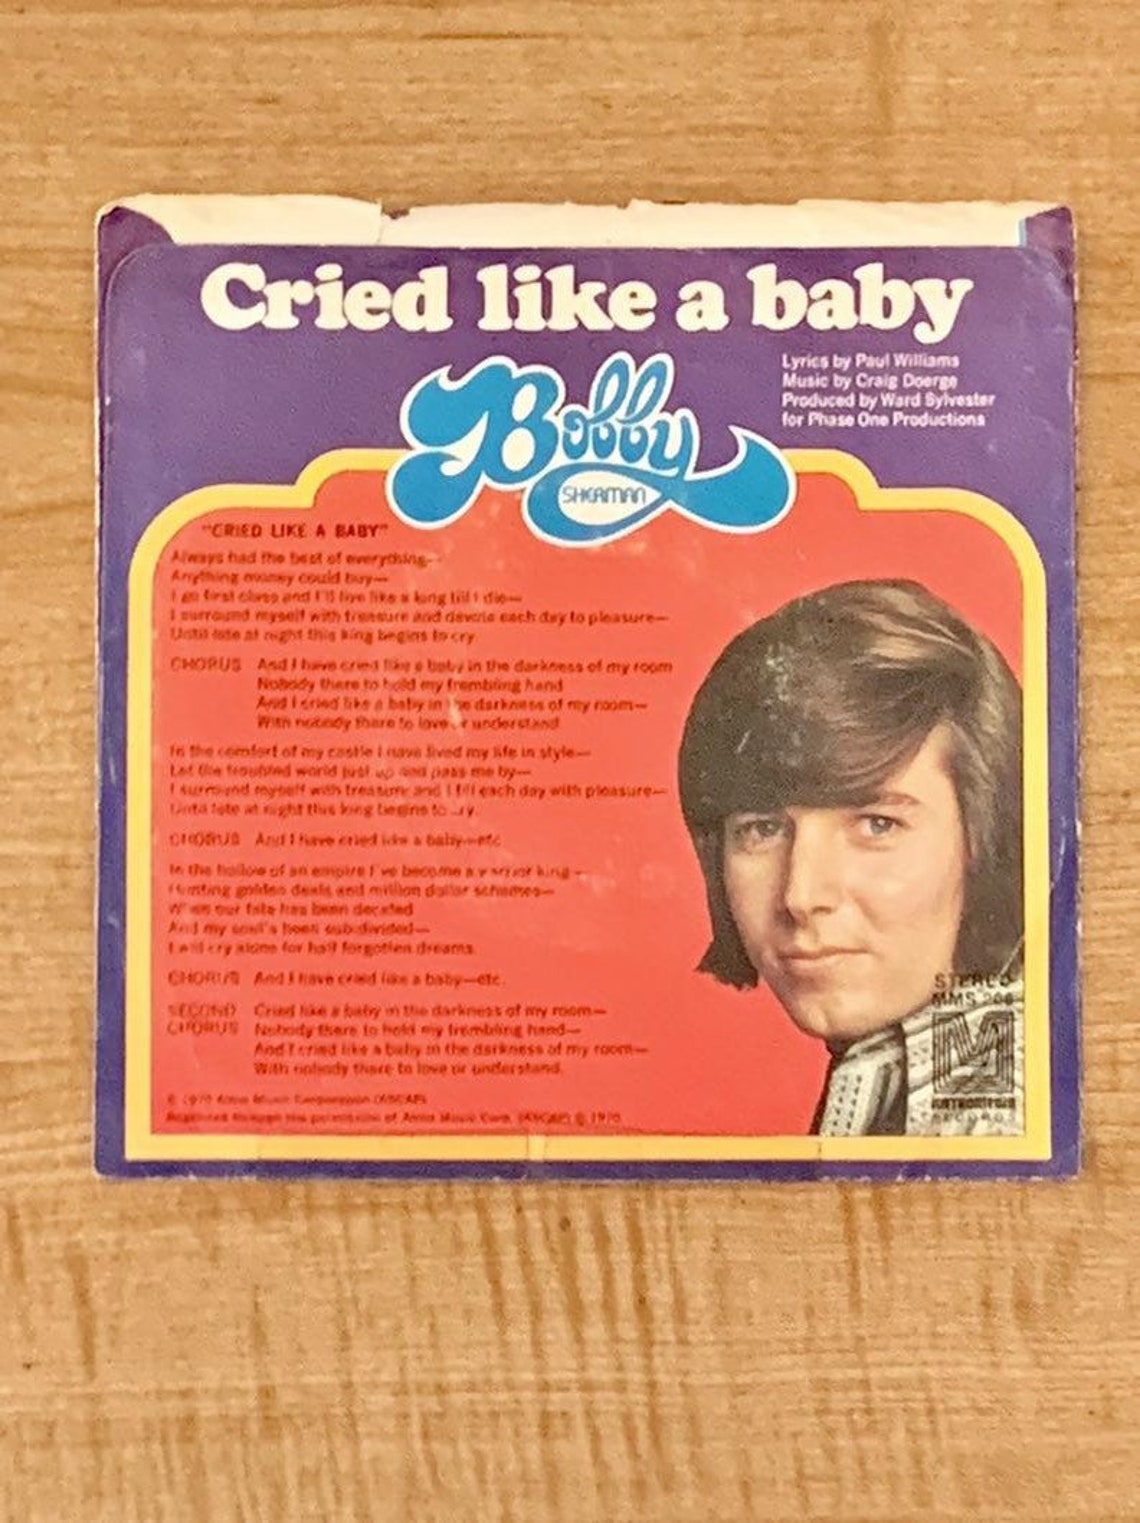 1971 Vintage 45 Record Bobby Sherman CRIED LIKE A BABY | Etsy